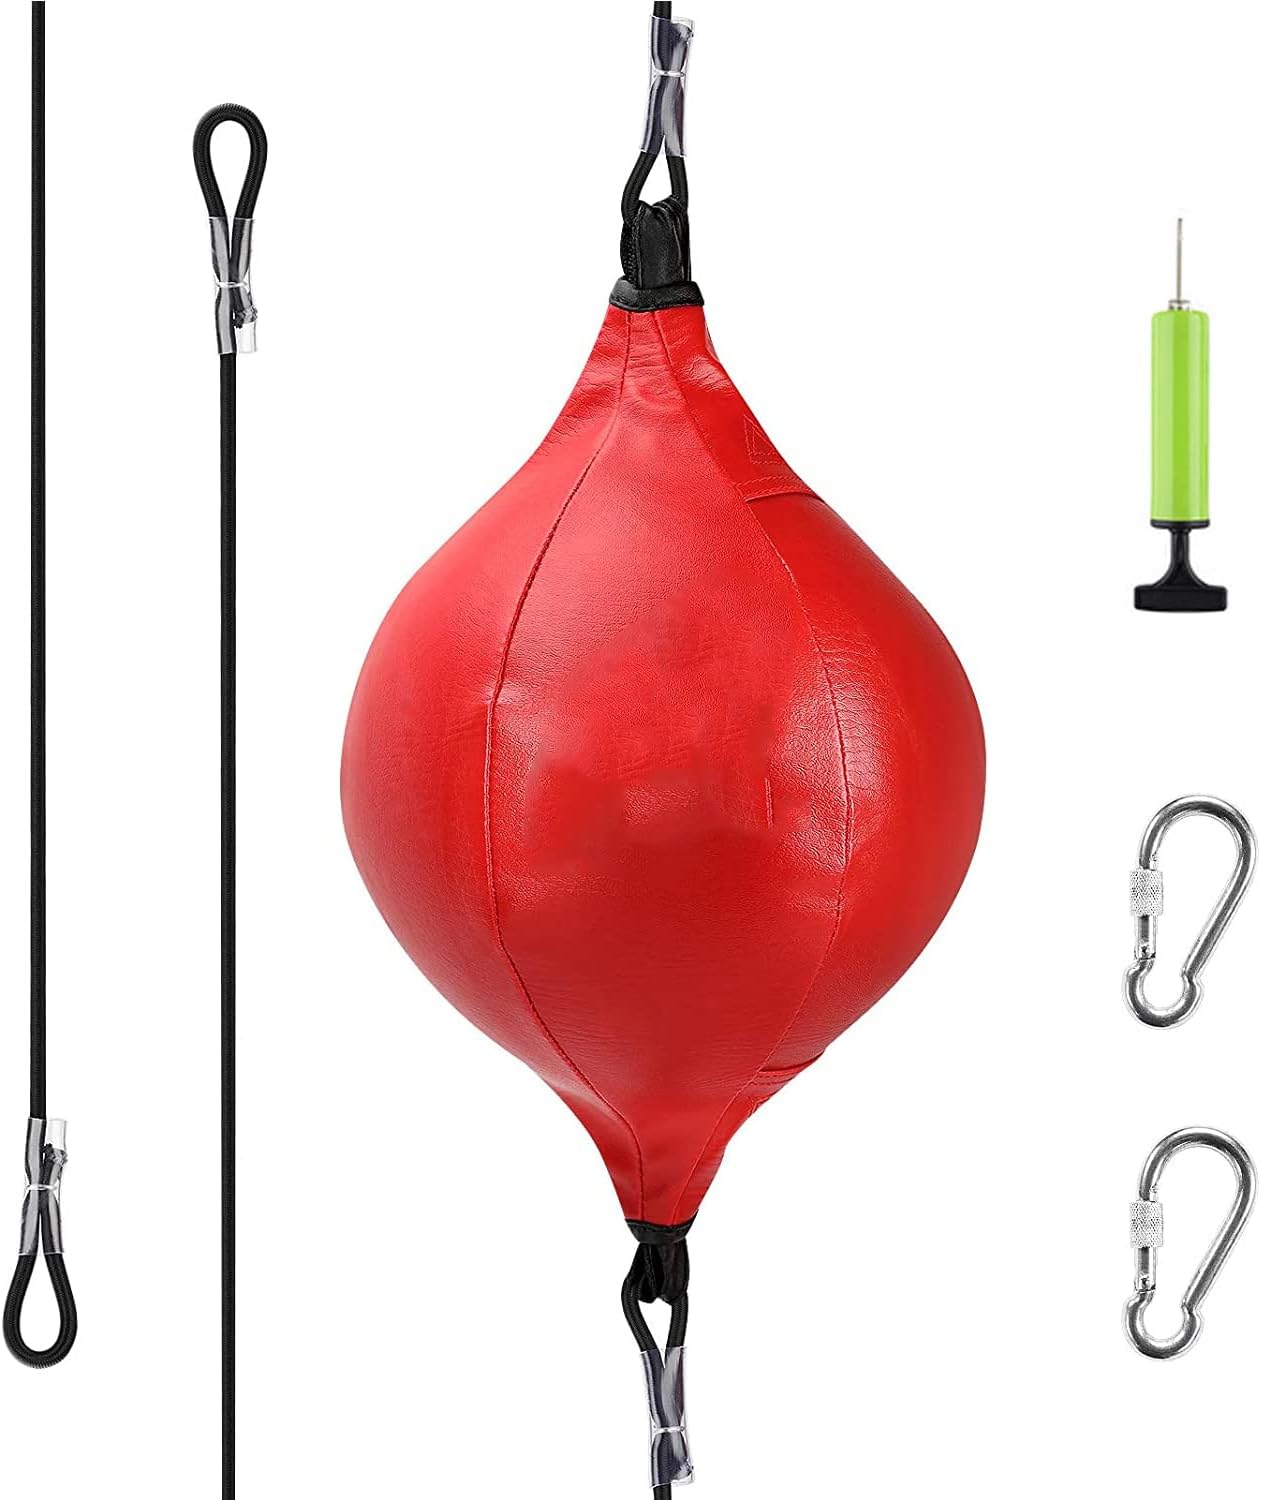 Arabest Double End Ball - Punching Bag for Kids and Adults, Leather Boxing Bag with Air Pump, Speed Bag for Reaction, Agility, Punching Speed, Fight Skill and Hand Eye Coordination Training